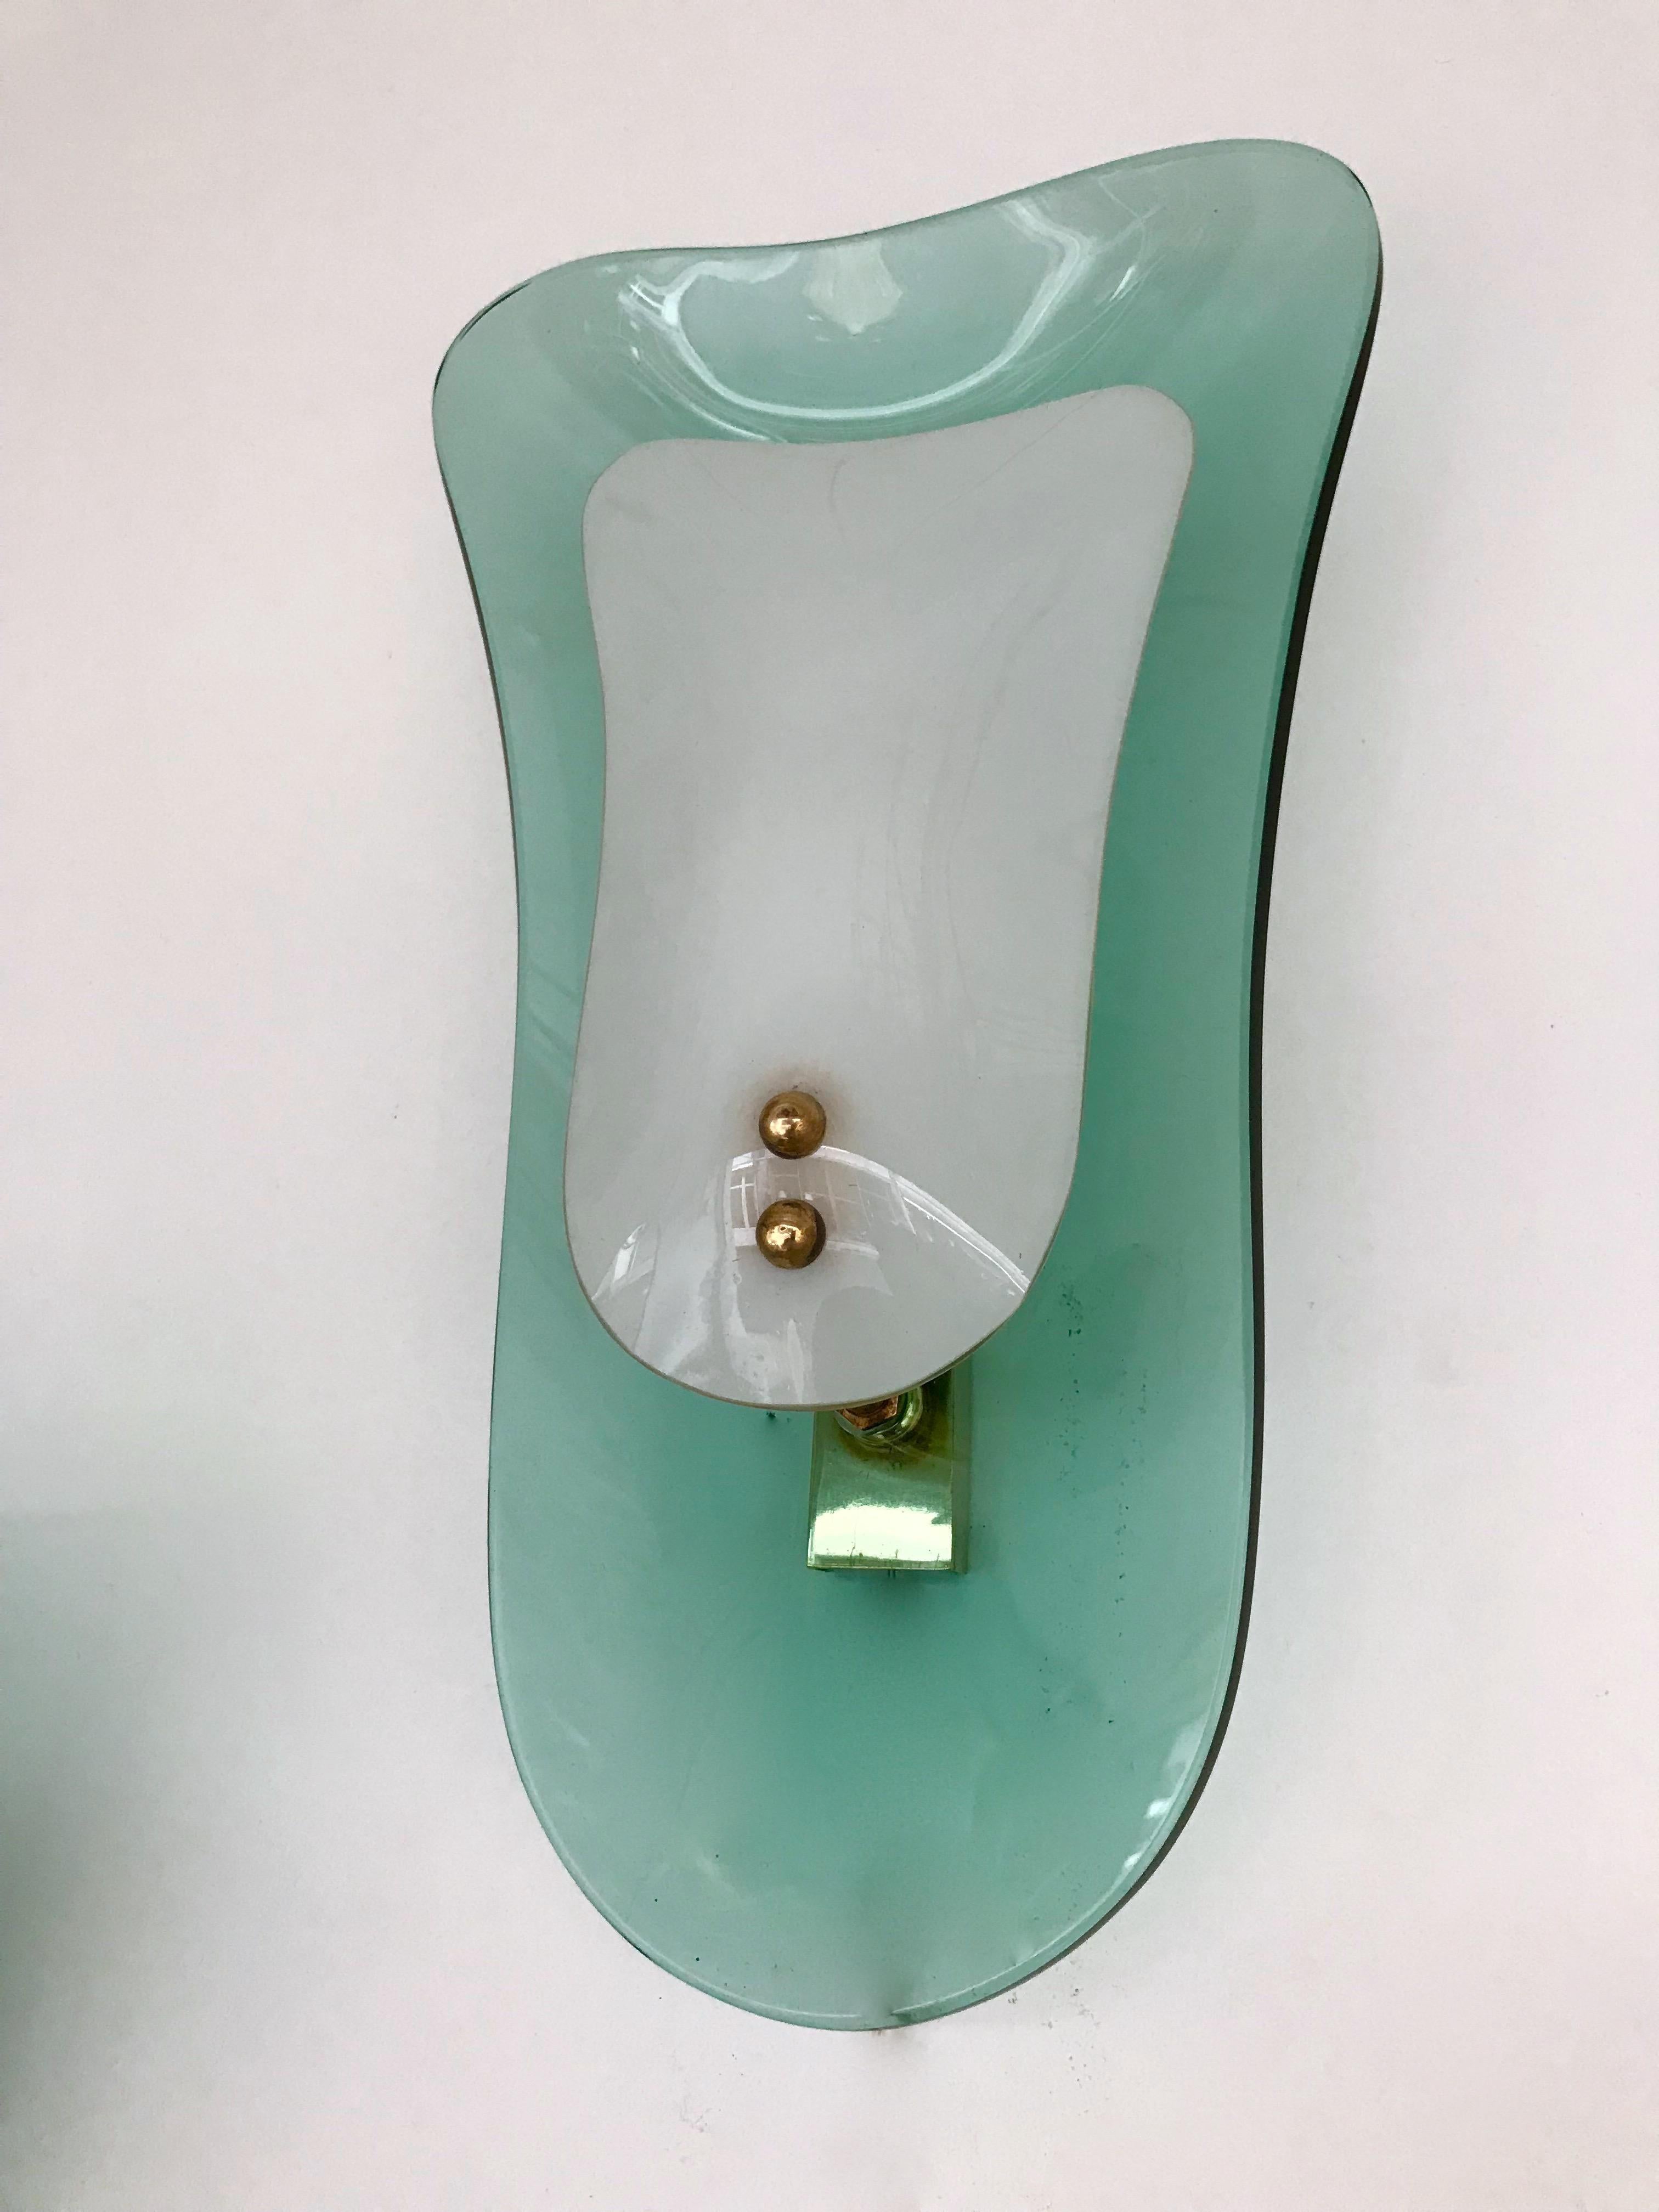 Rare wall lights sconces in blue turquoise green curve glass and opaline diffuser, brass elements by the famous glass manufacture Cristal Art who was the concurrent of Fontana Arte at the same period. The sconces are referenced in the Cristal Art